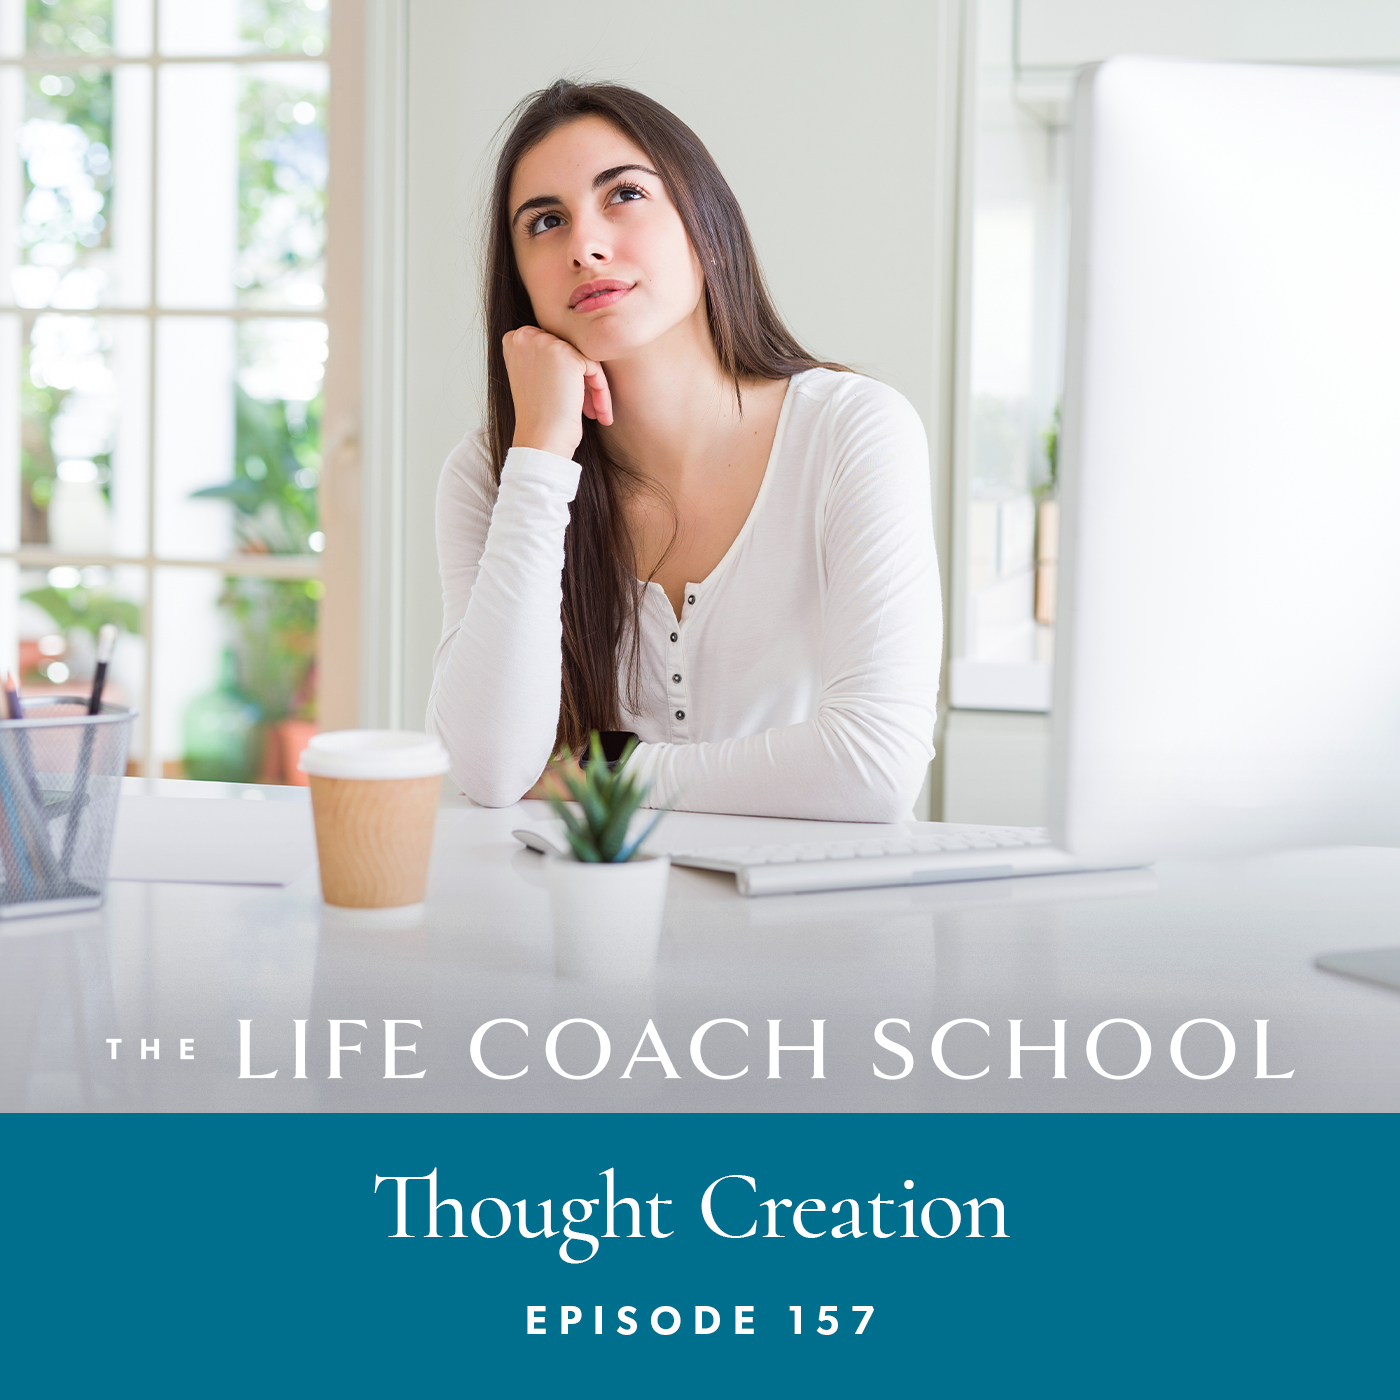 The Life Coach School Podcast with Brooke Castillo | Episode 157 | Thought Creation